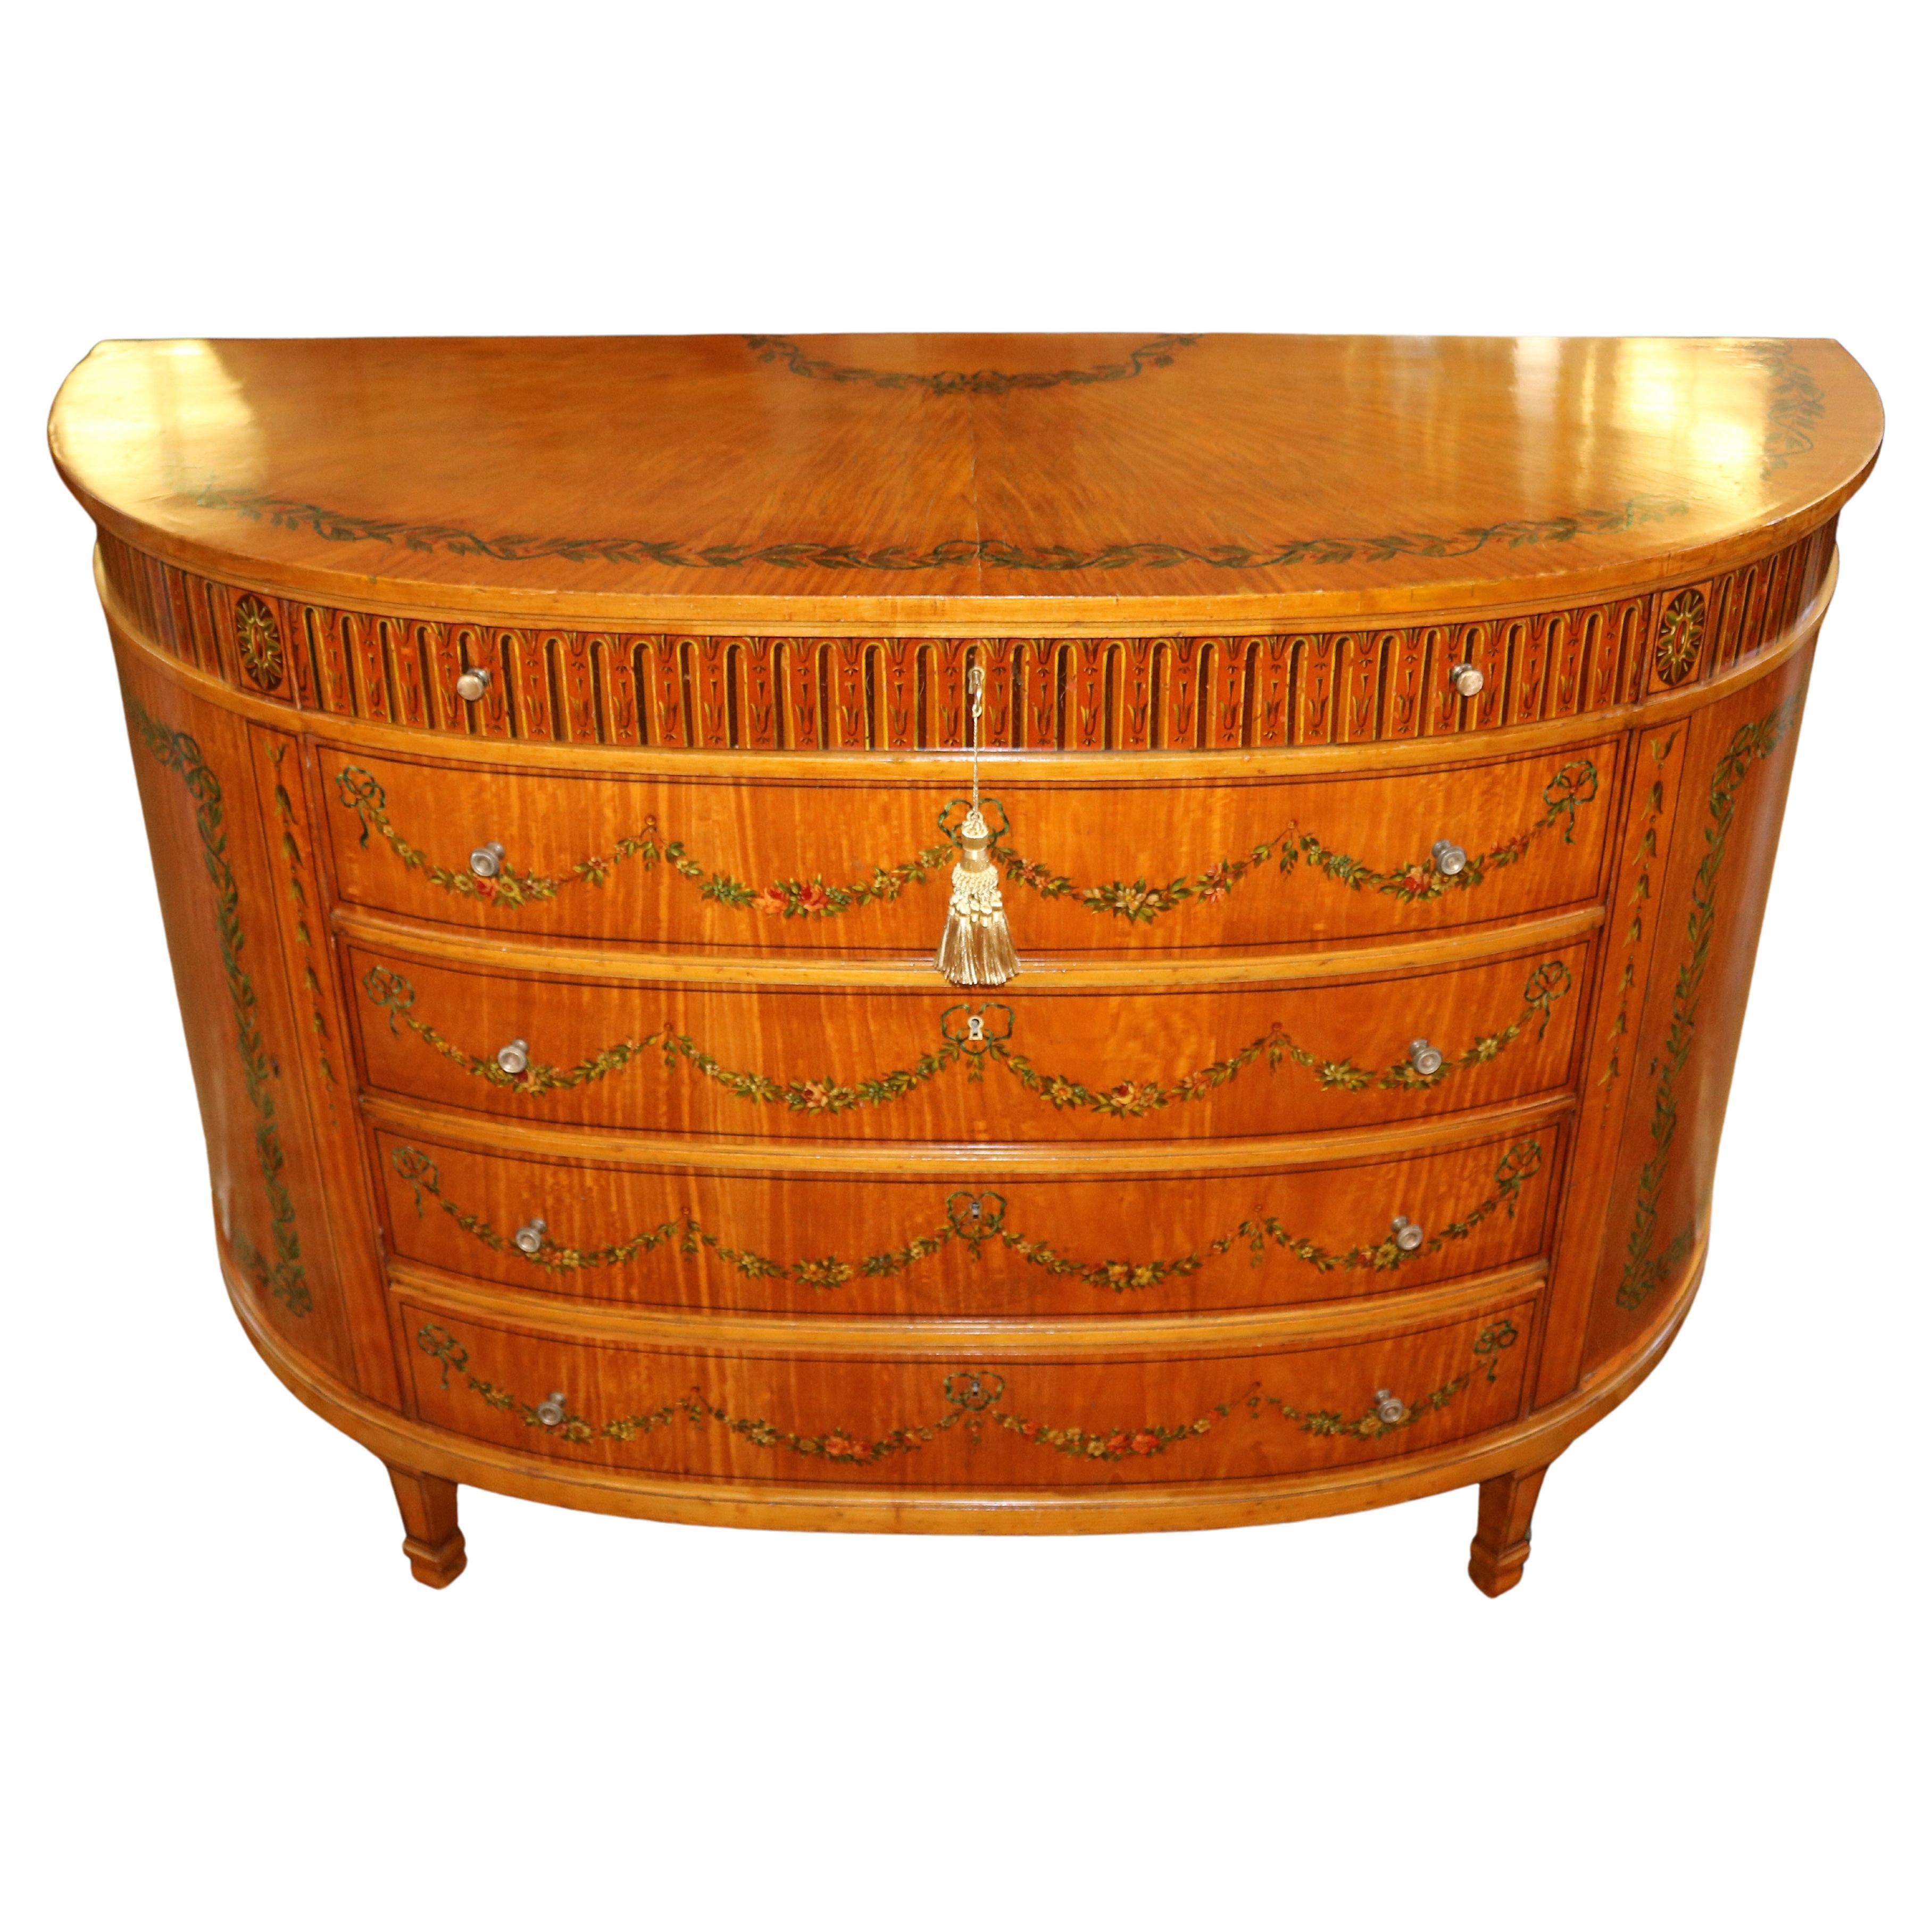 F.O Schmidt Vienna Adams Style Satinwood Paint Decorated Dresser Commode 1910 For Sale